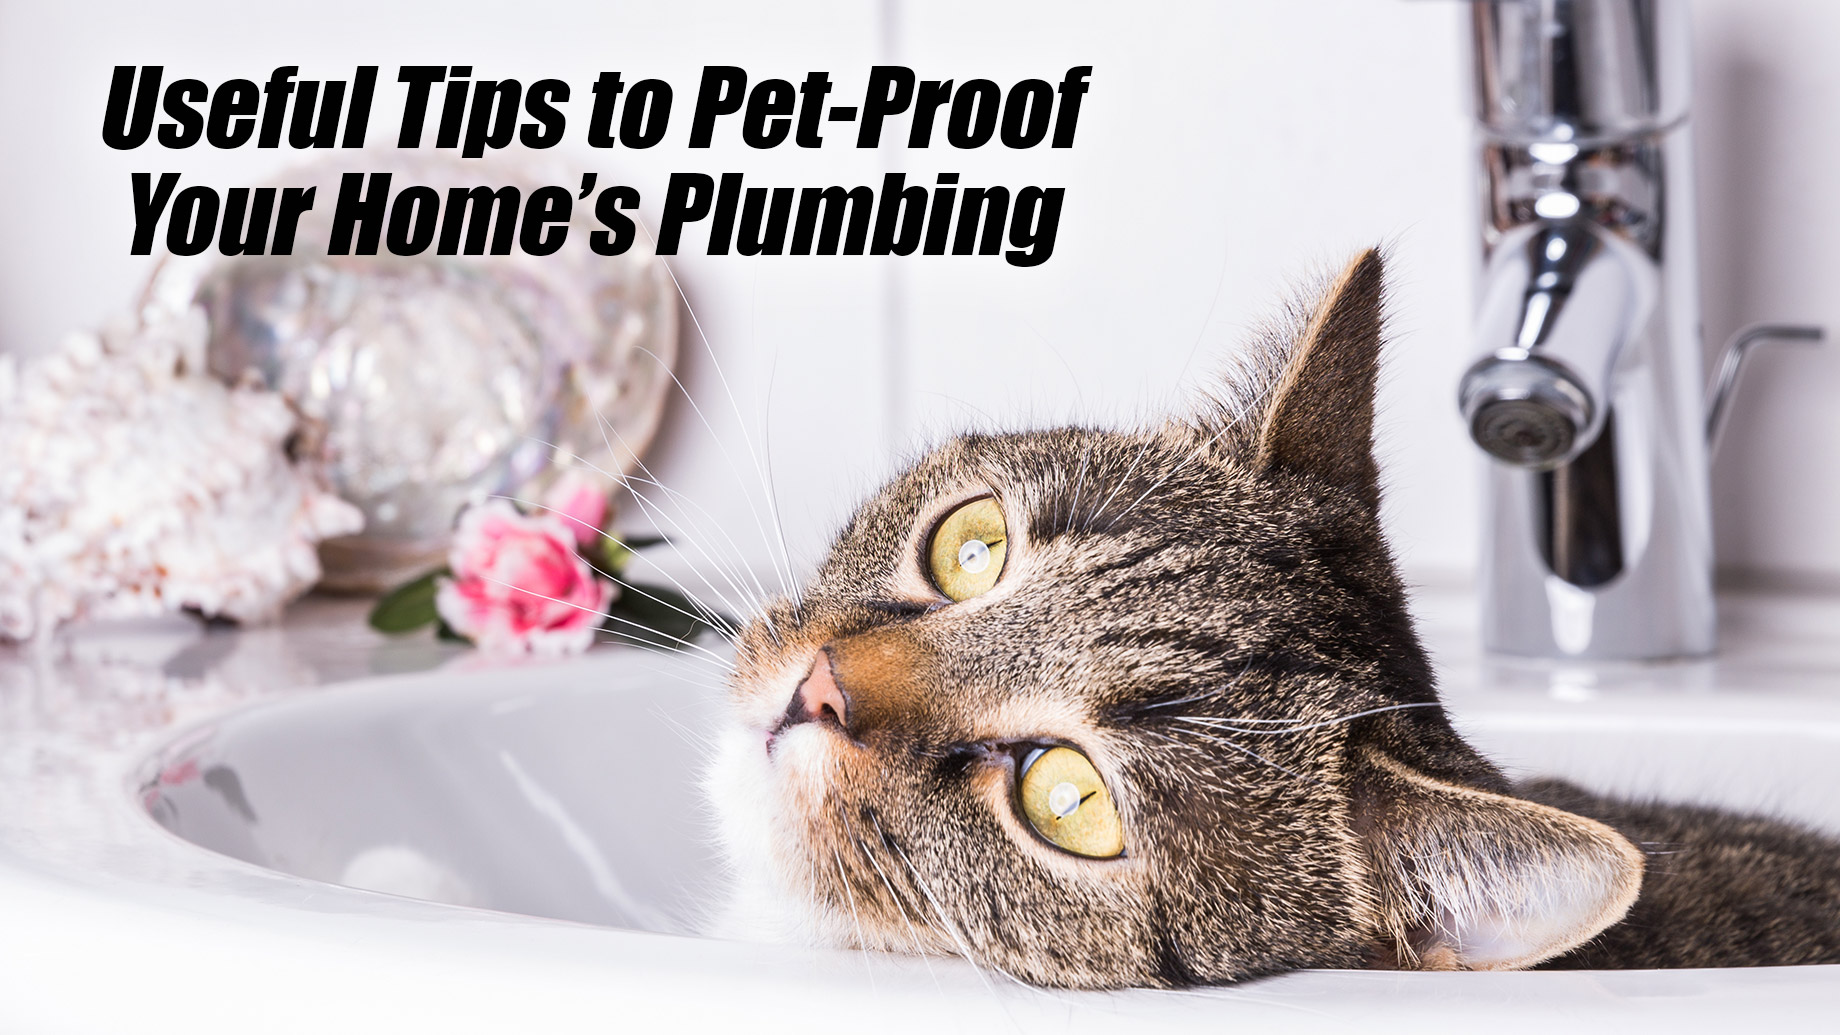 Useful Tips to Pet-Proof Your Home’s Plumbing